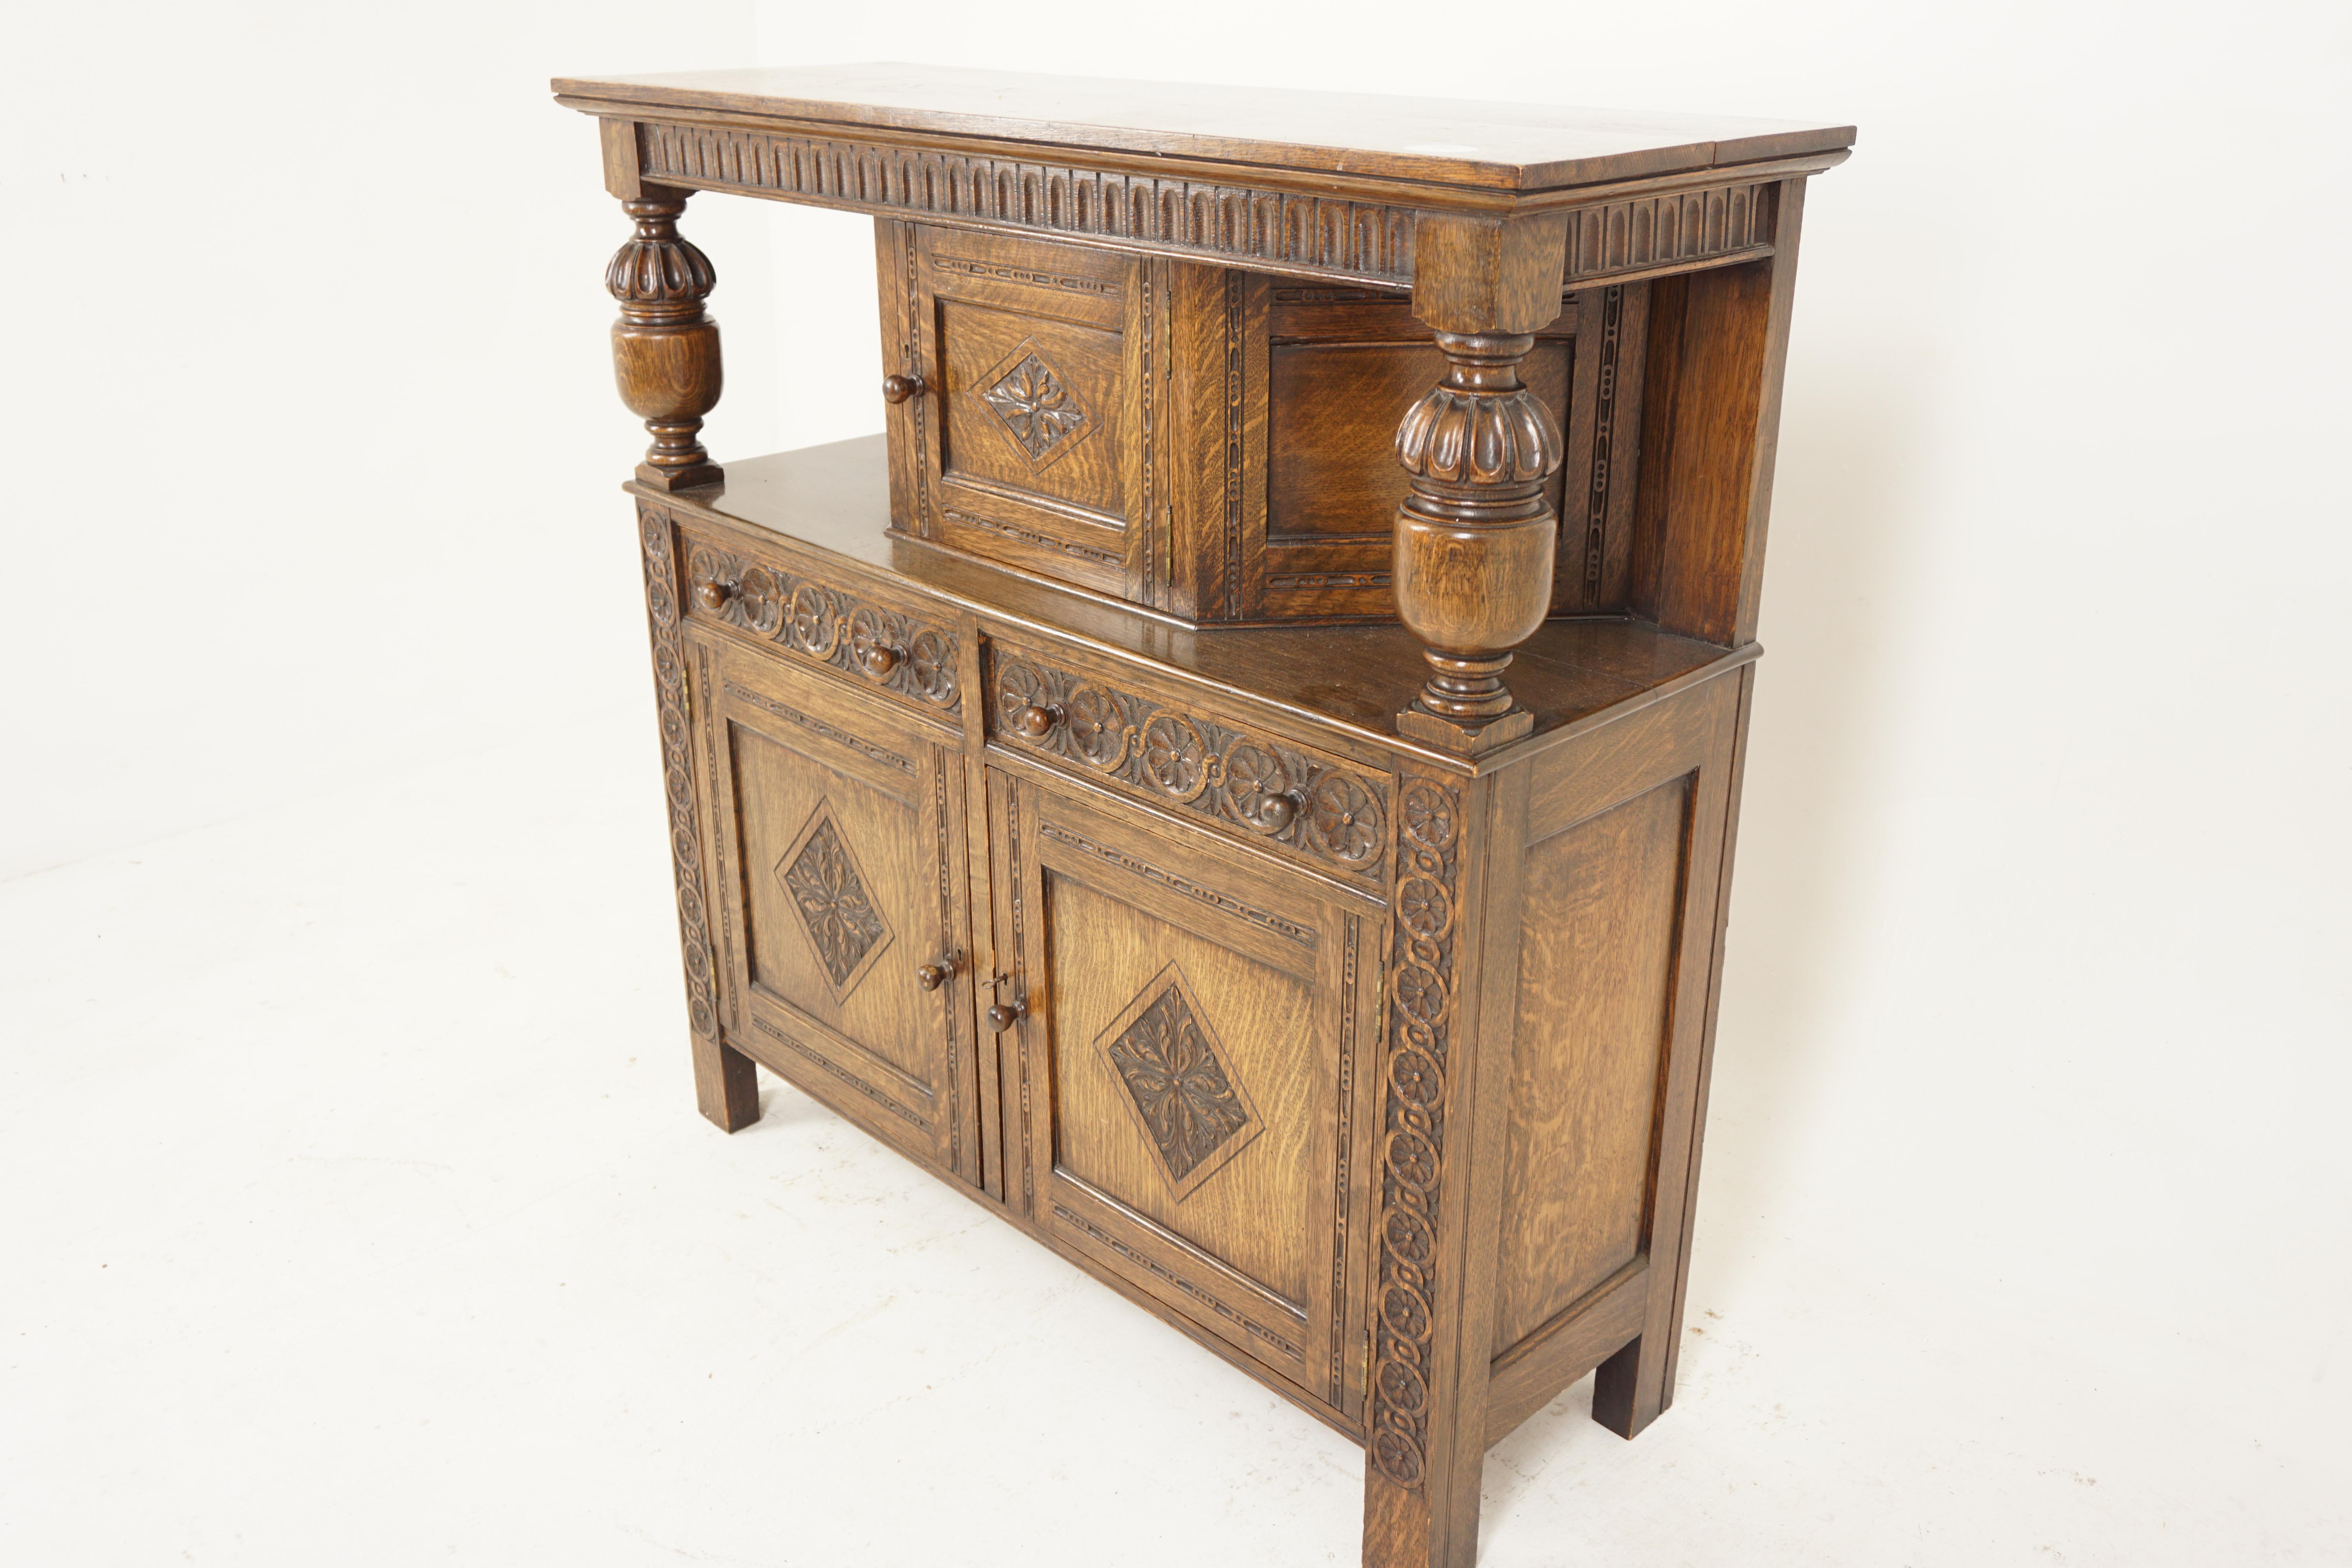 Vintage carved oak court cupboard, sideboard, buffet, Chiffonier, Scotland 1930, H689

Scotland 1930
Solid Carved Oak
Original Finish
Rectangular top with carved frieze
Shaped cupboard under with cupboard
Door to the center opens to reveal storage